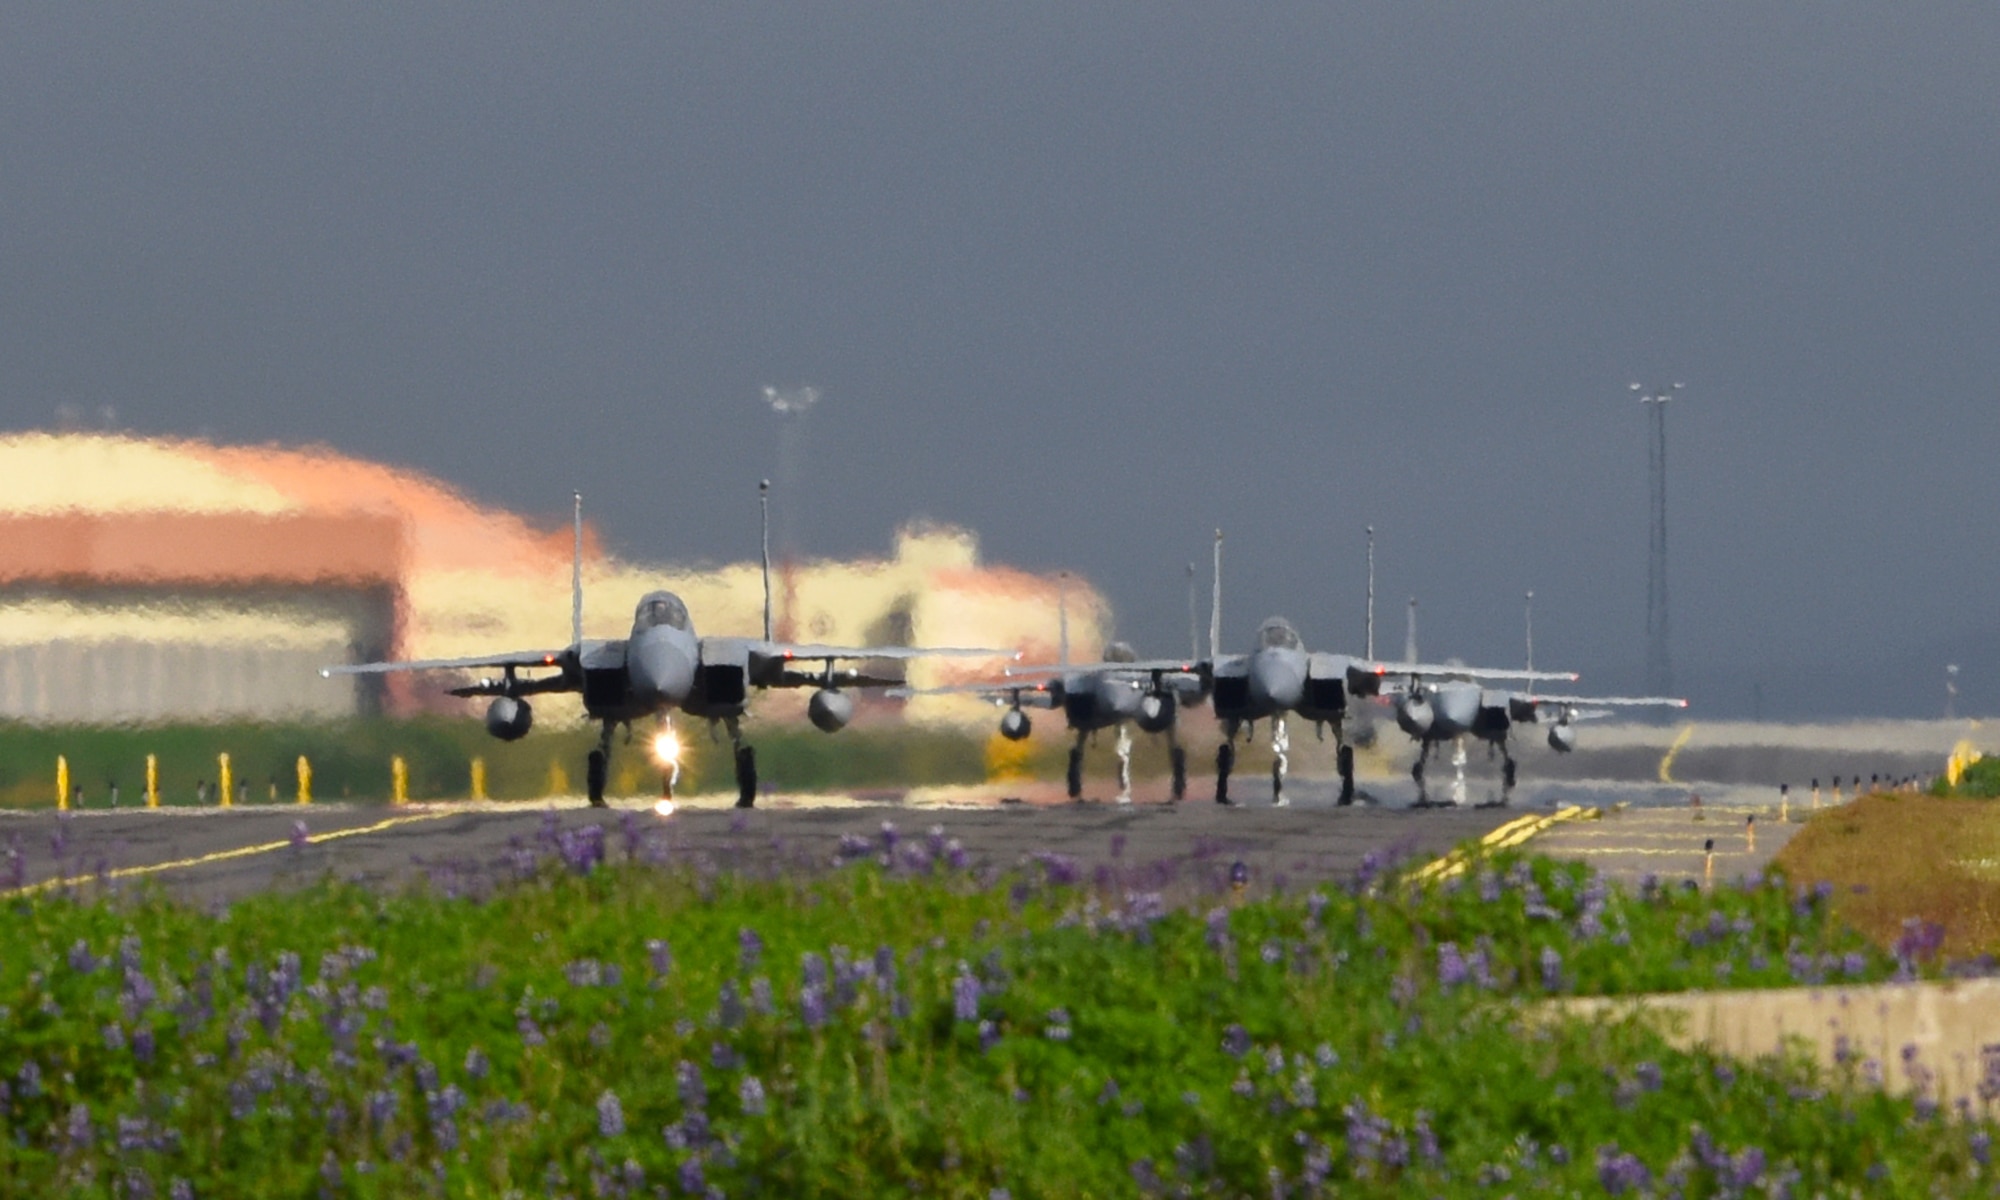 Four F-15C Eagles assigned to the 493rd Expeditionary Fighter Squadron taxi at Keflavik Air Base, Iceland, July 30, 2018 in support of NATO’s Icelandic Air Surveillance mission. IAS promotes regional stability and security, while strengthening partner capabilities and fostering trust. (U.S. Air Force photo/ Staff Sgt. Alex Fox Echols III)